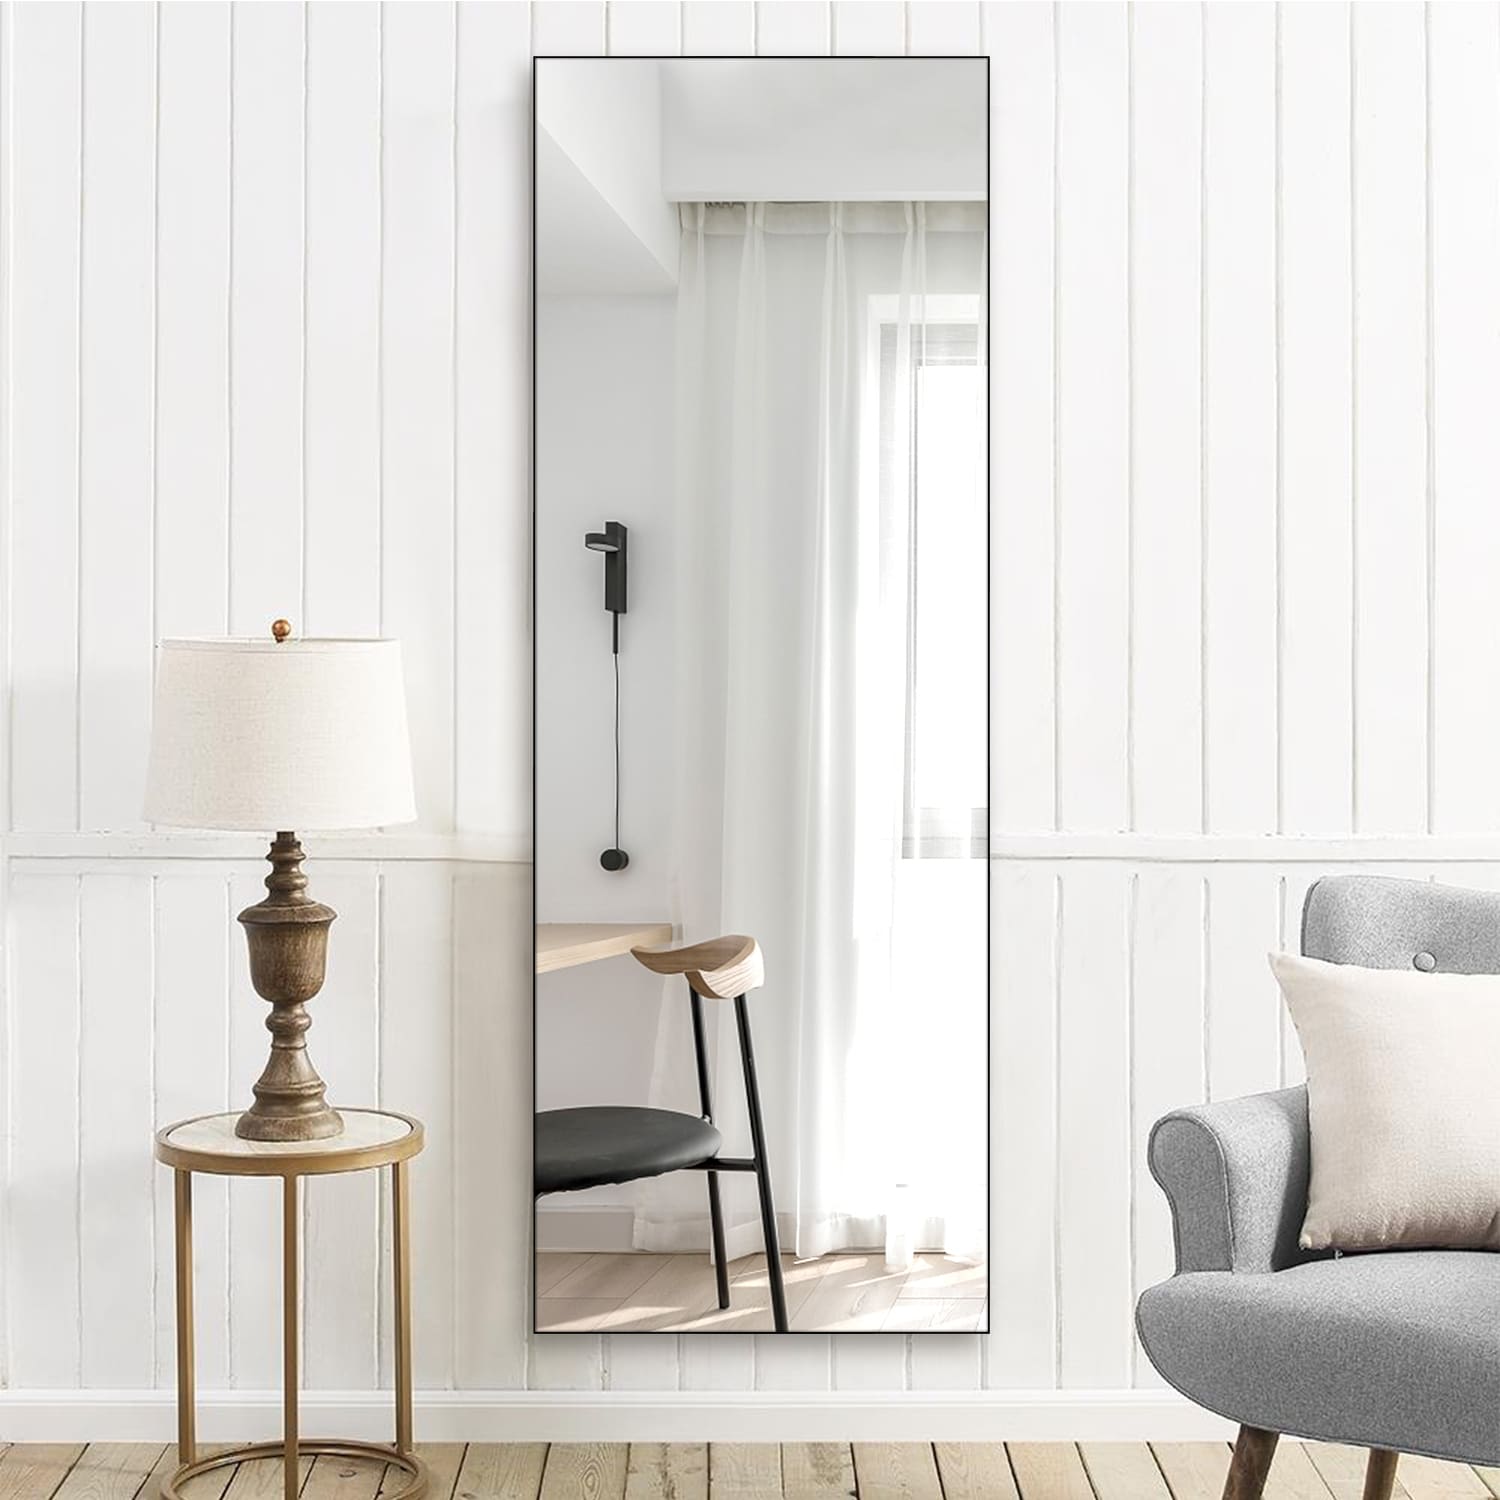 NeuType 20-in W x 55-in H Black Framed Full Length Wall Mirror at Lowes.com